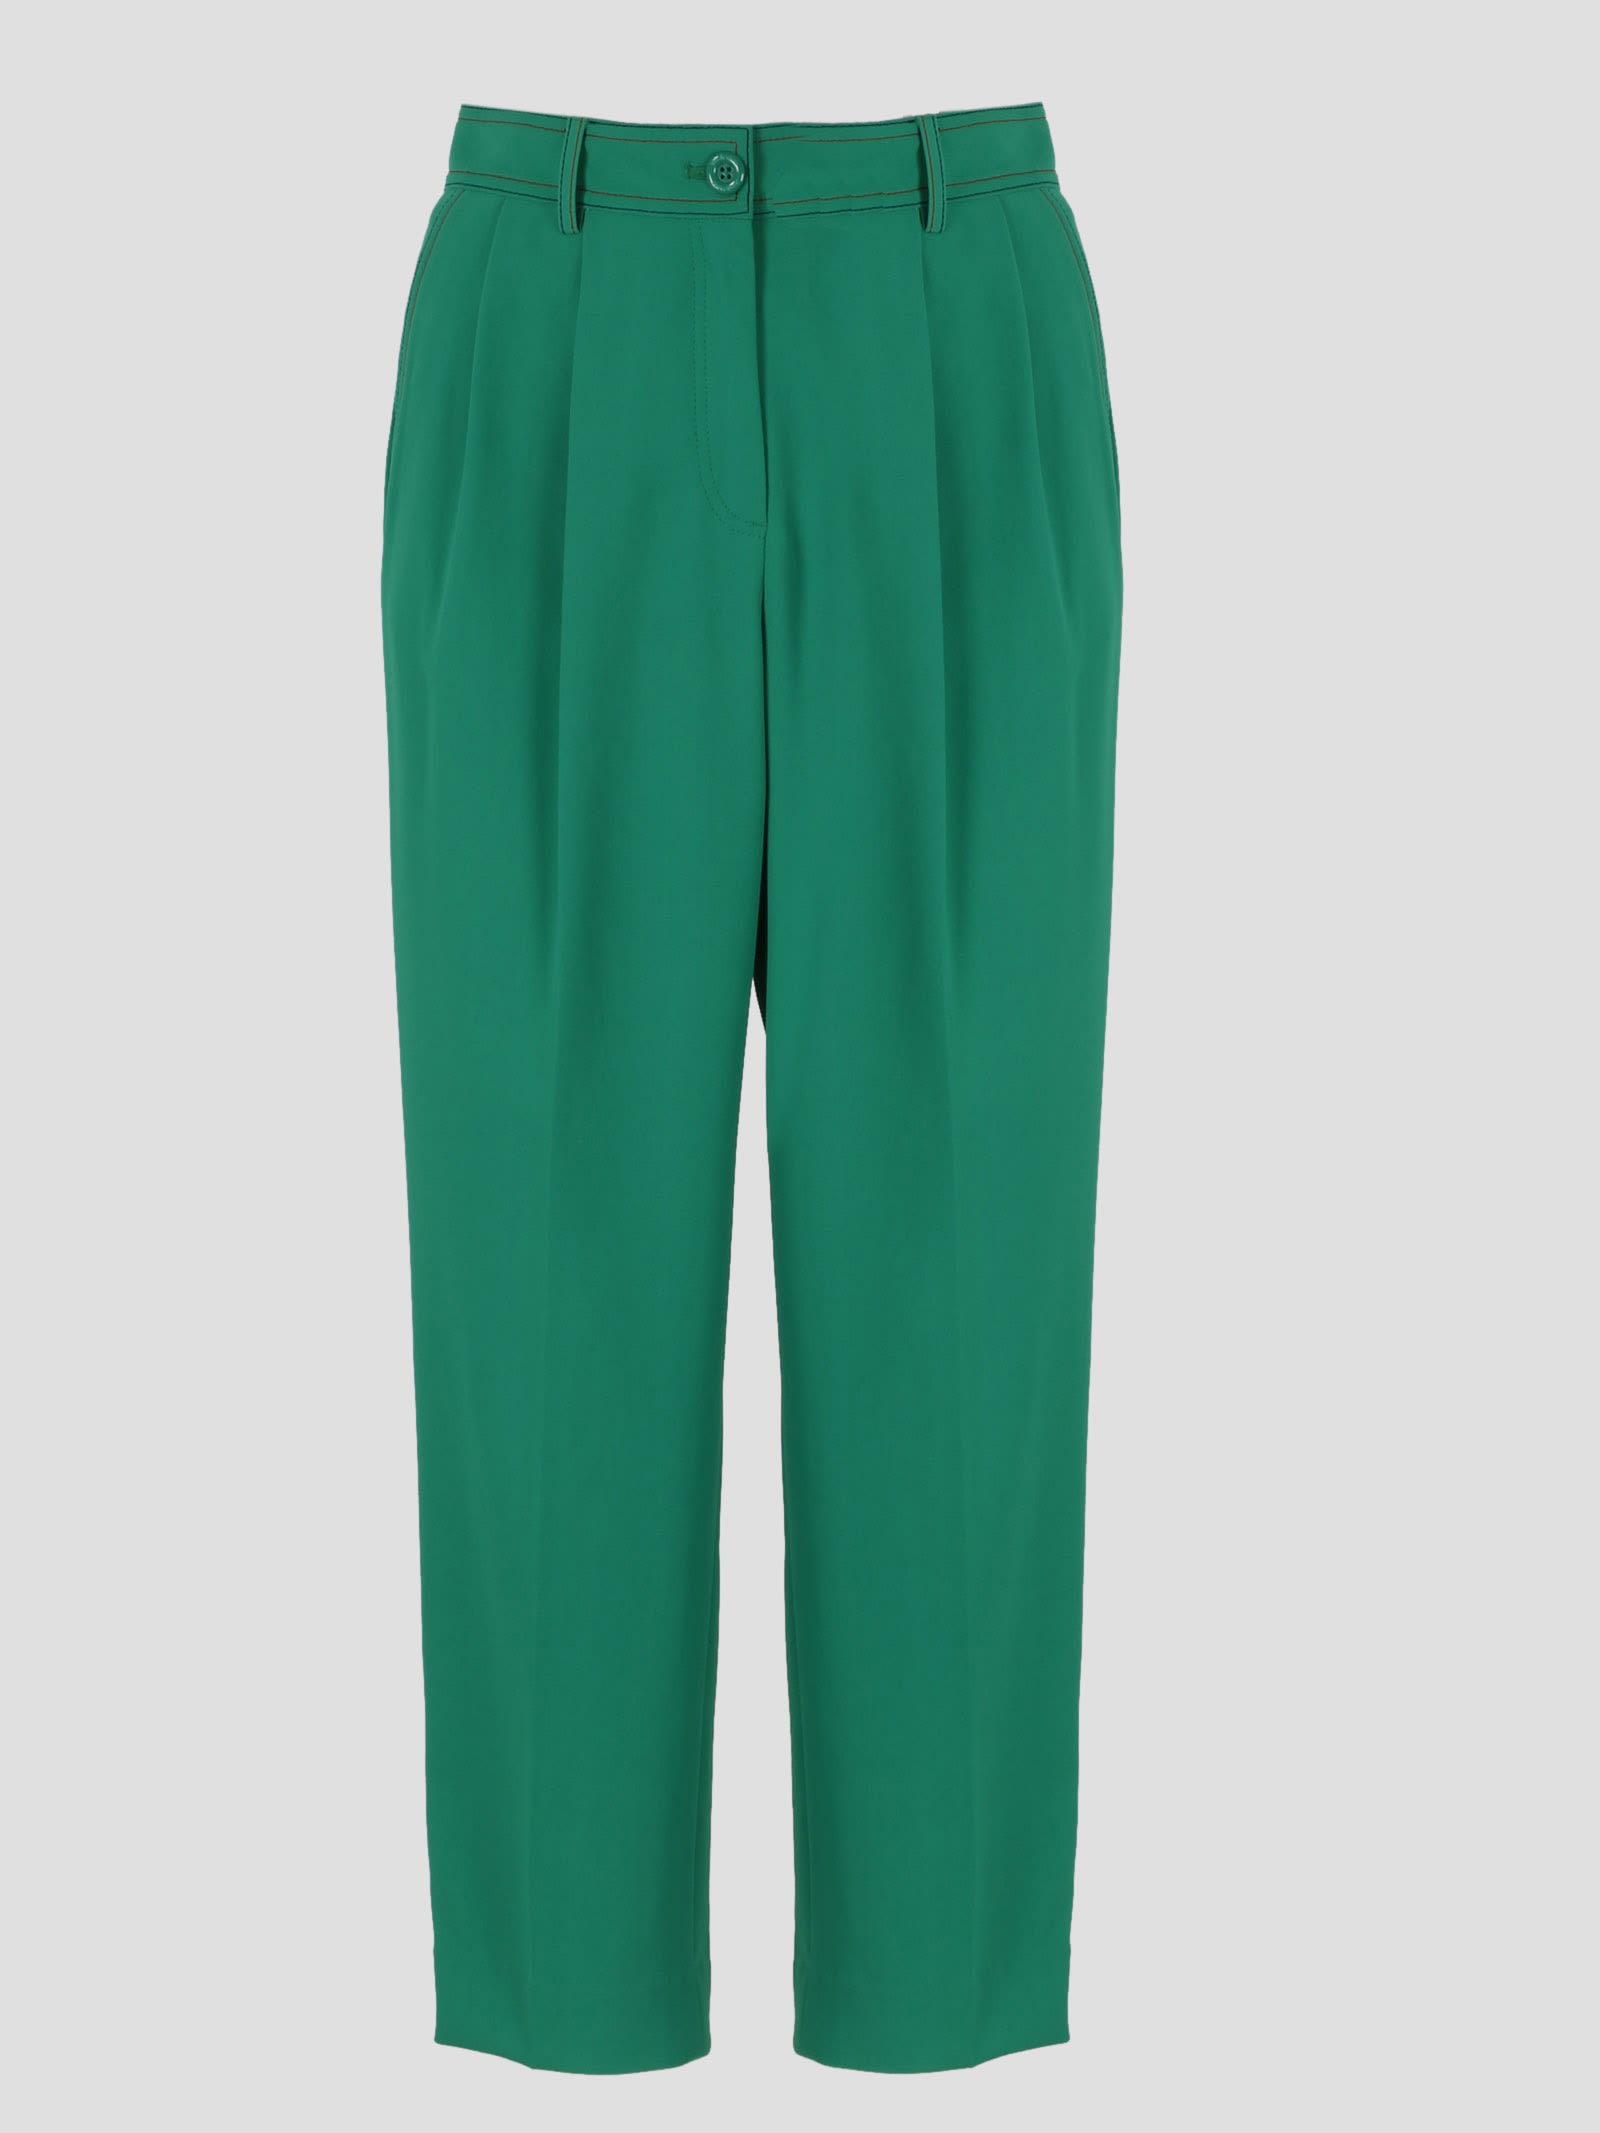 See by Chloé Contrast Stitching Pant